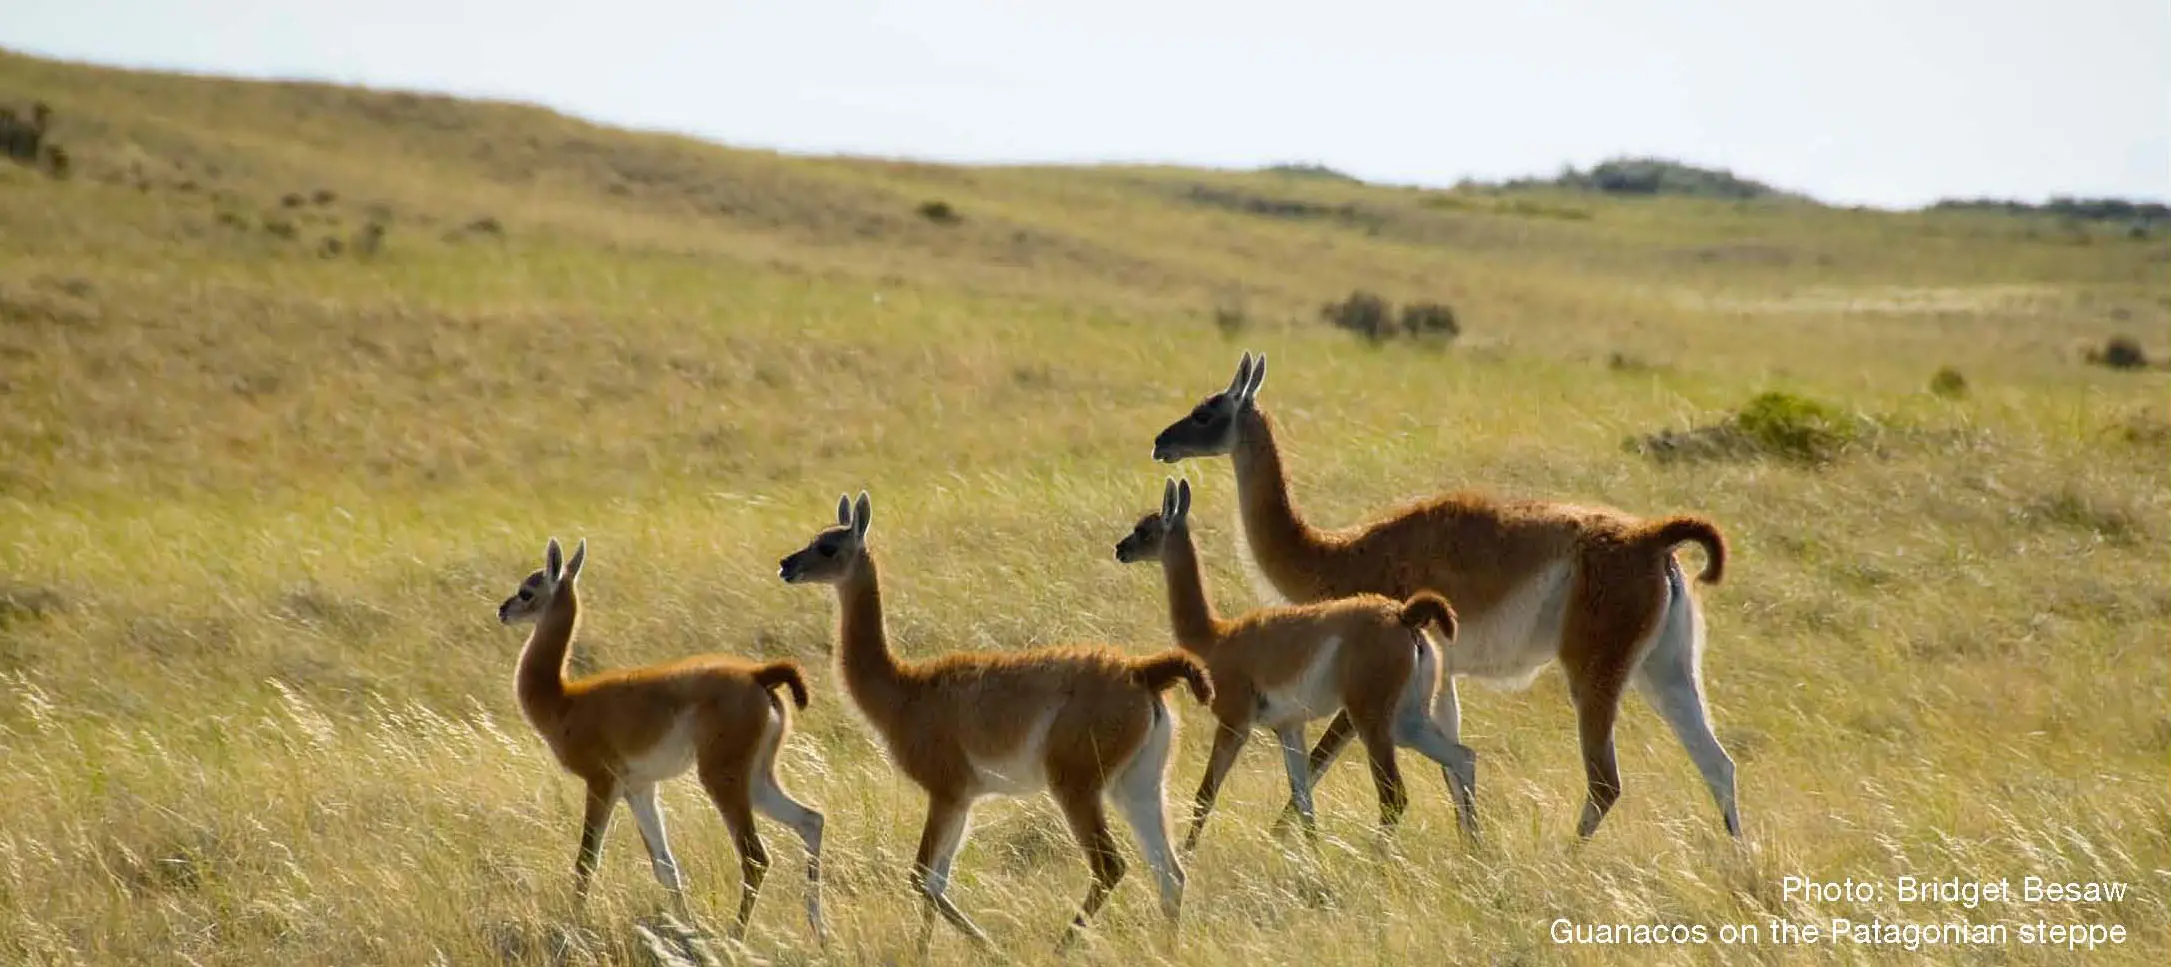 Guanacos on the Patagonian Steppe